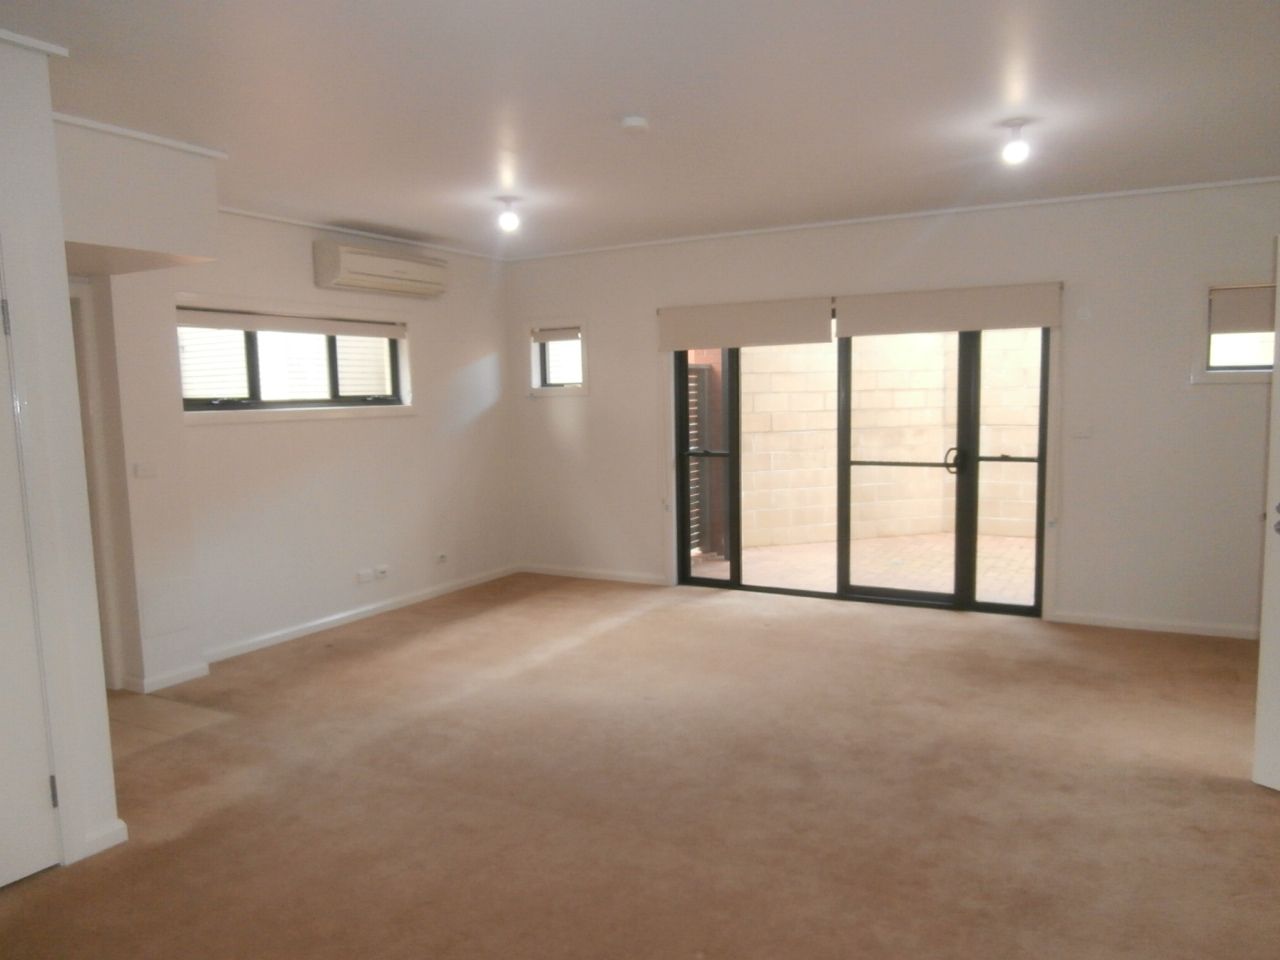 73 Perkins Street, The Hill NSW 2300, Image 1